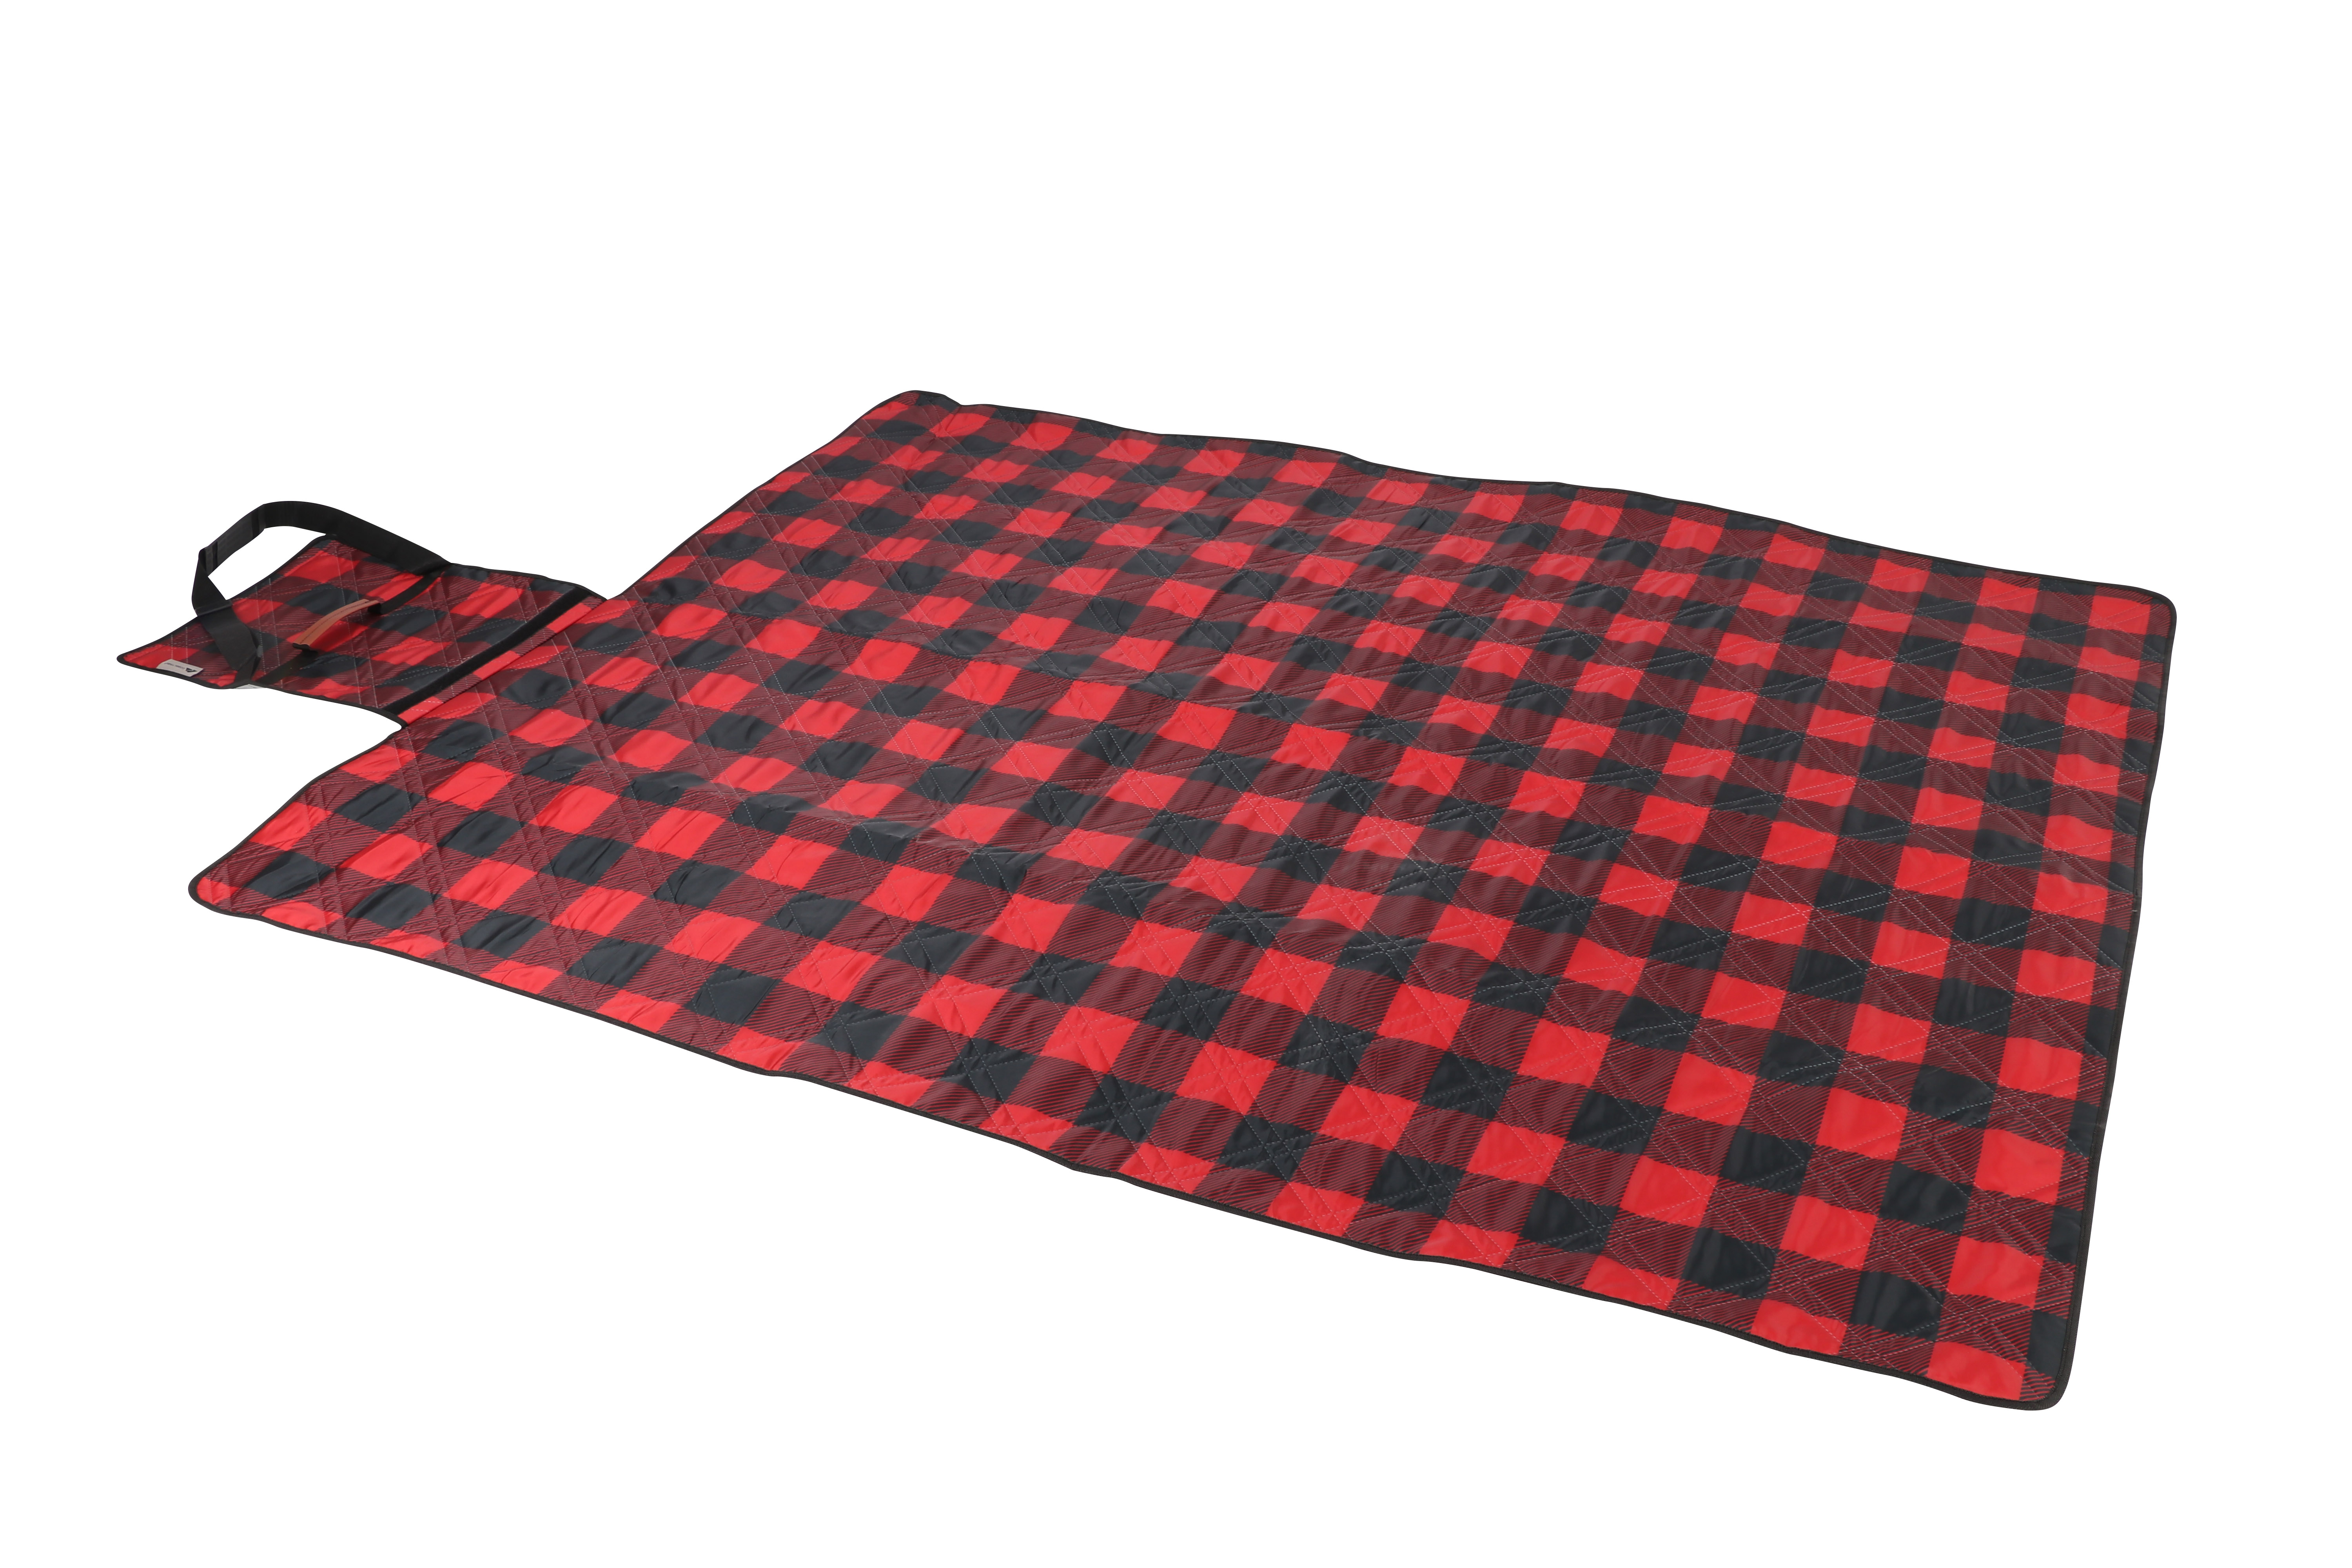 Ozark Trail 3 Piece Buffalo Plaid Camping Chairs and Blanket Combo, Red - image 3 of 6